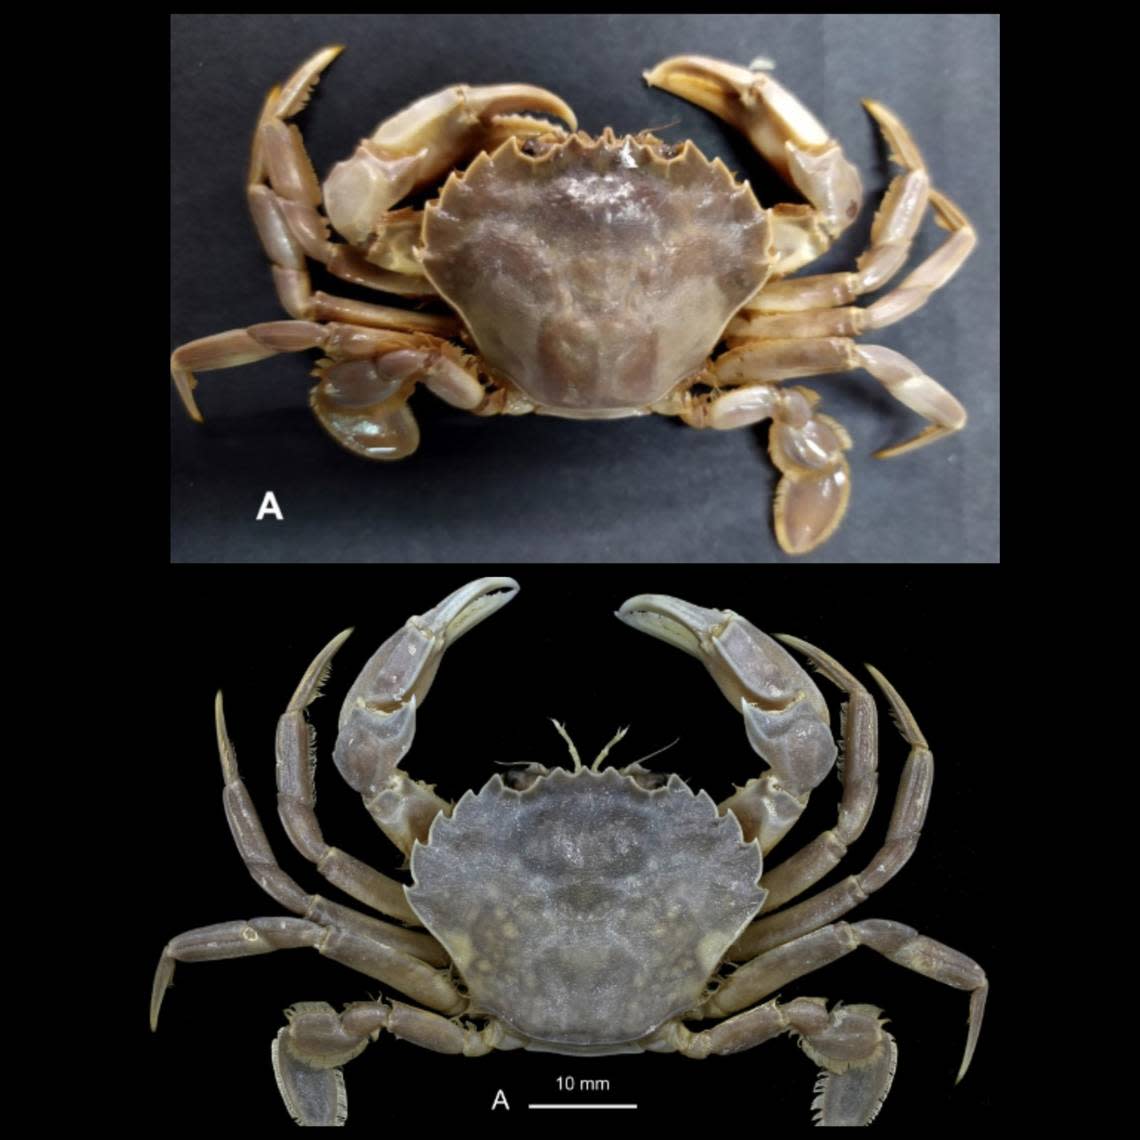 Other crabs of the new species found in Morocco and Belgium had the same body shape but were different colors, the researchers said.